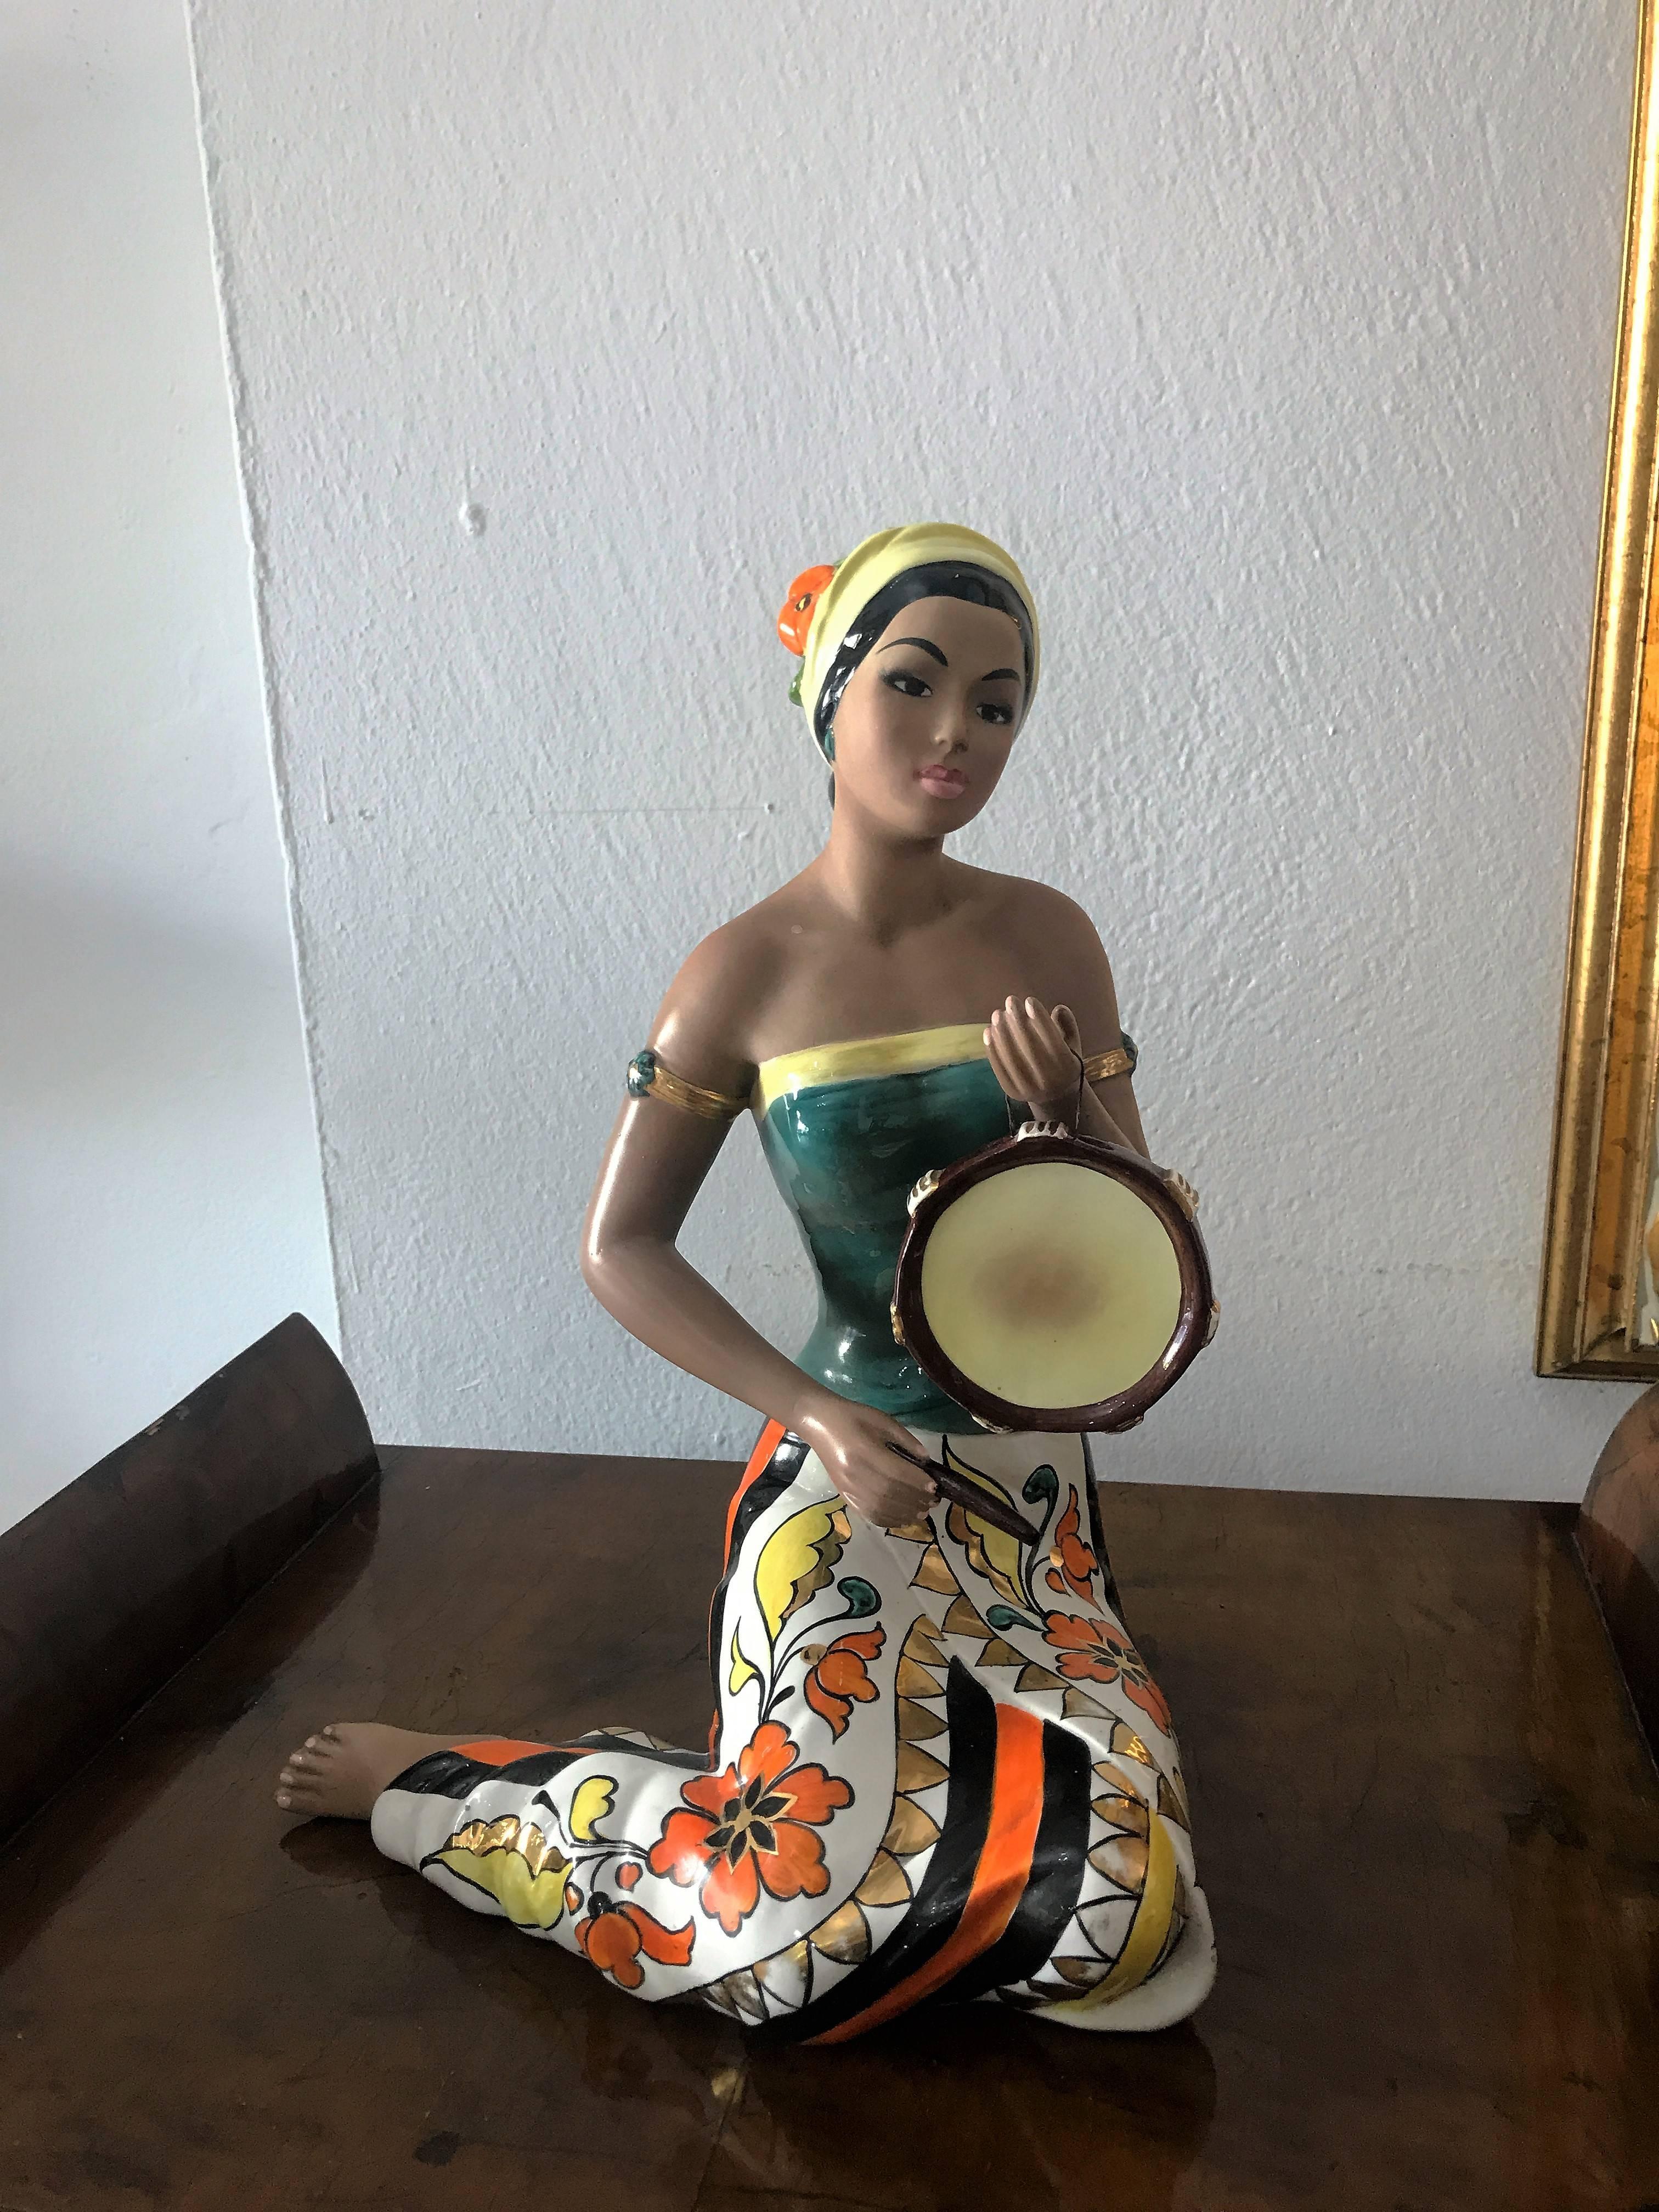 Beautiful ceramic statue, painted entirely by hand.
Female statuette playing tambourine.
Note the features of the face, details of the skirt. Really special in everything.
Stamped, signed and numbered under the base.
The statue has been restored